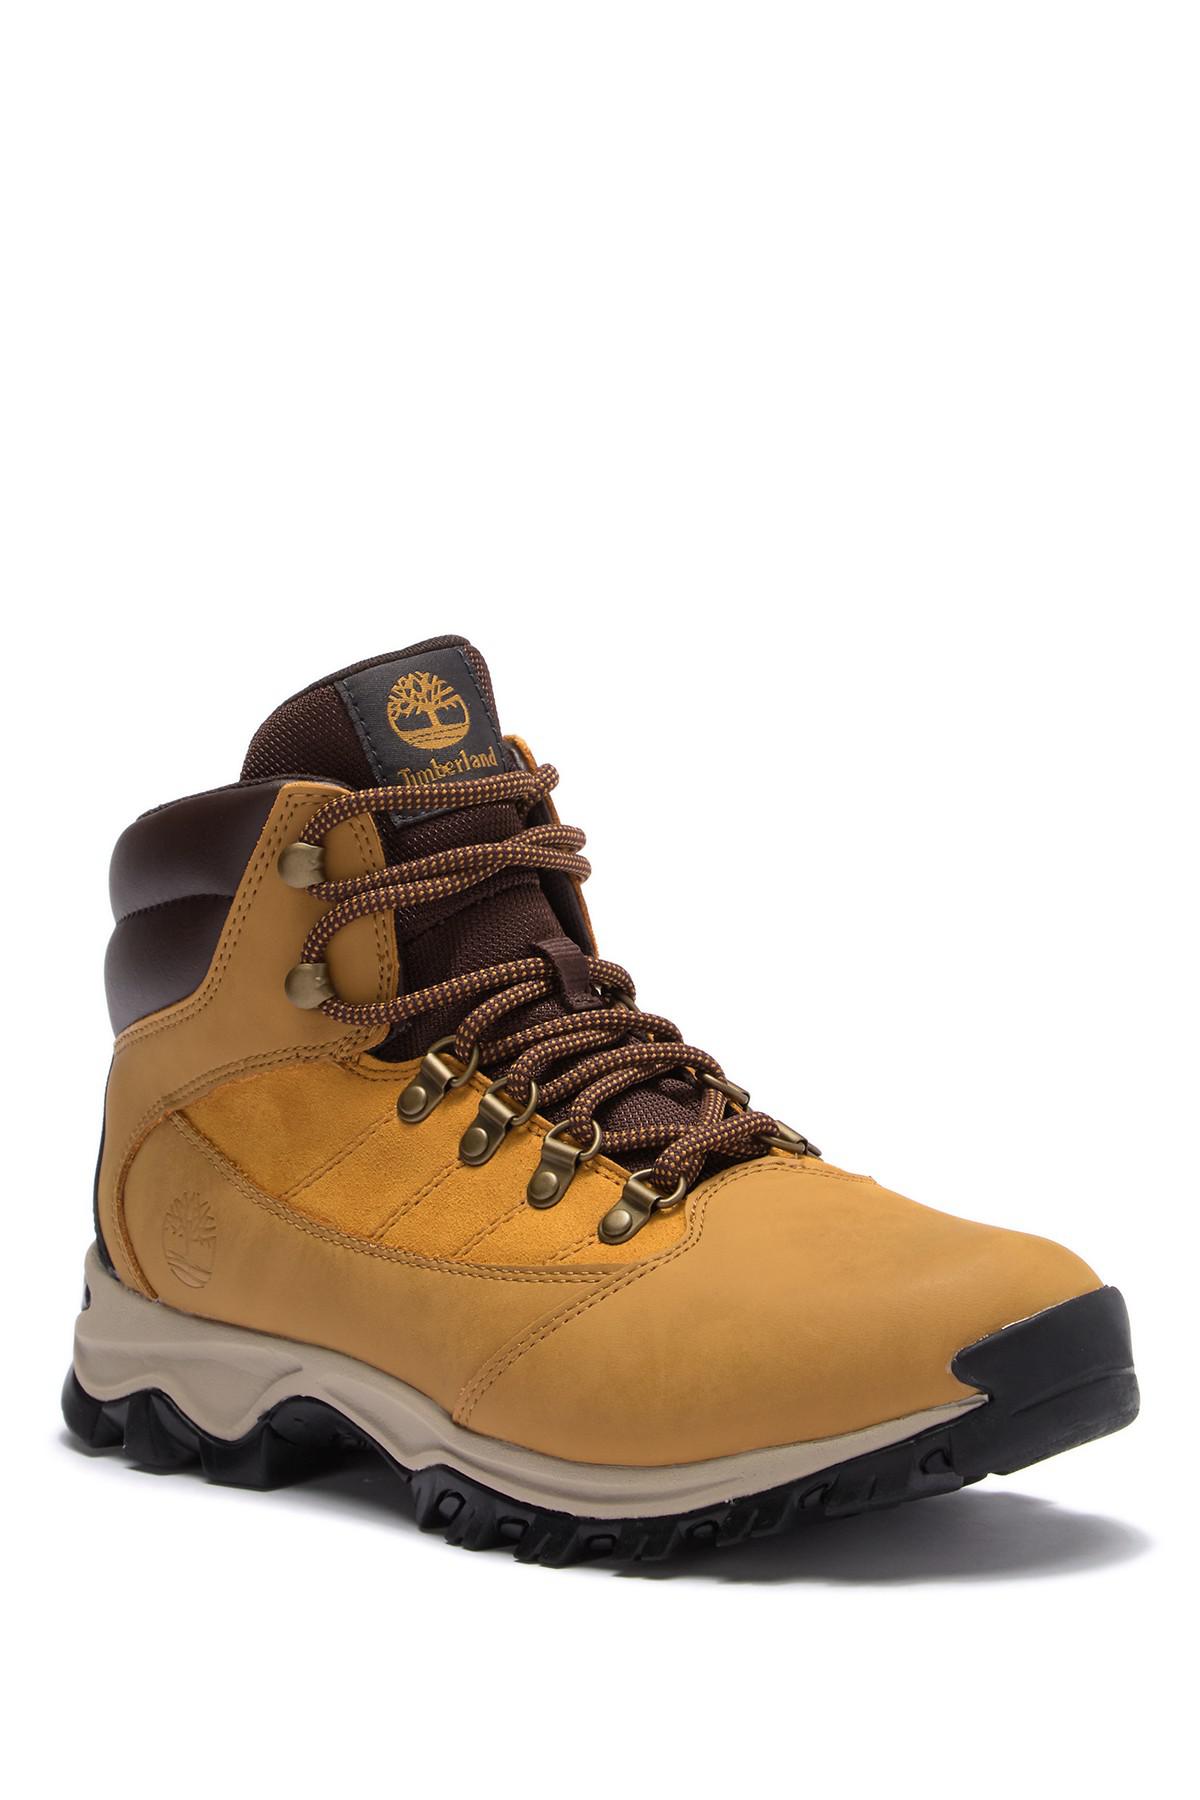 timberland rangeley mid leather boot